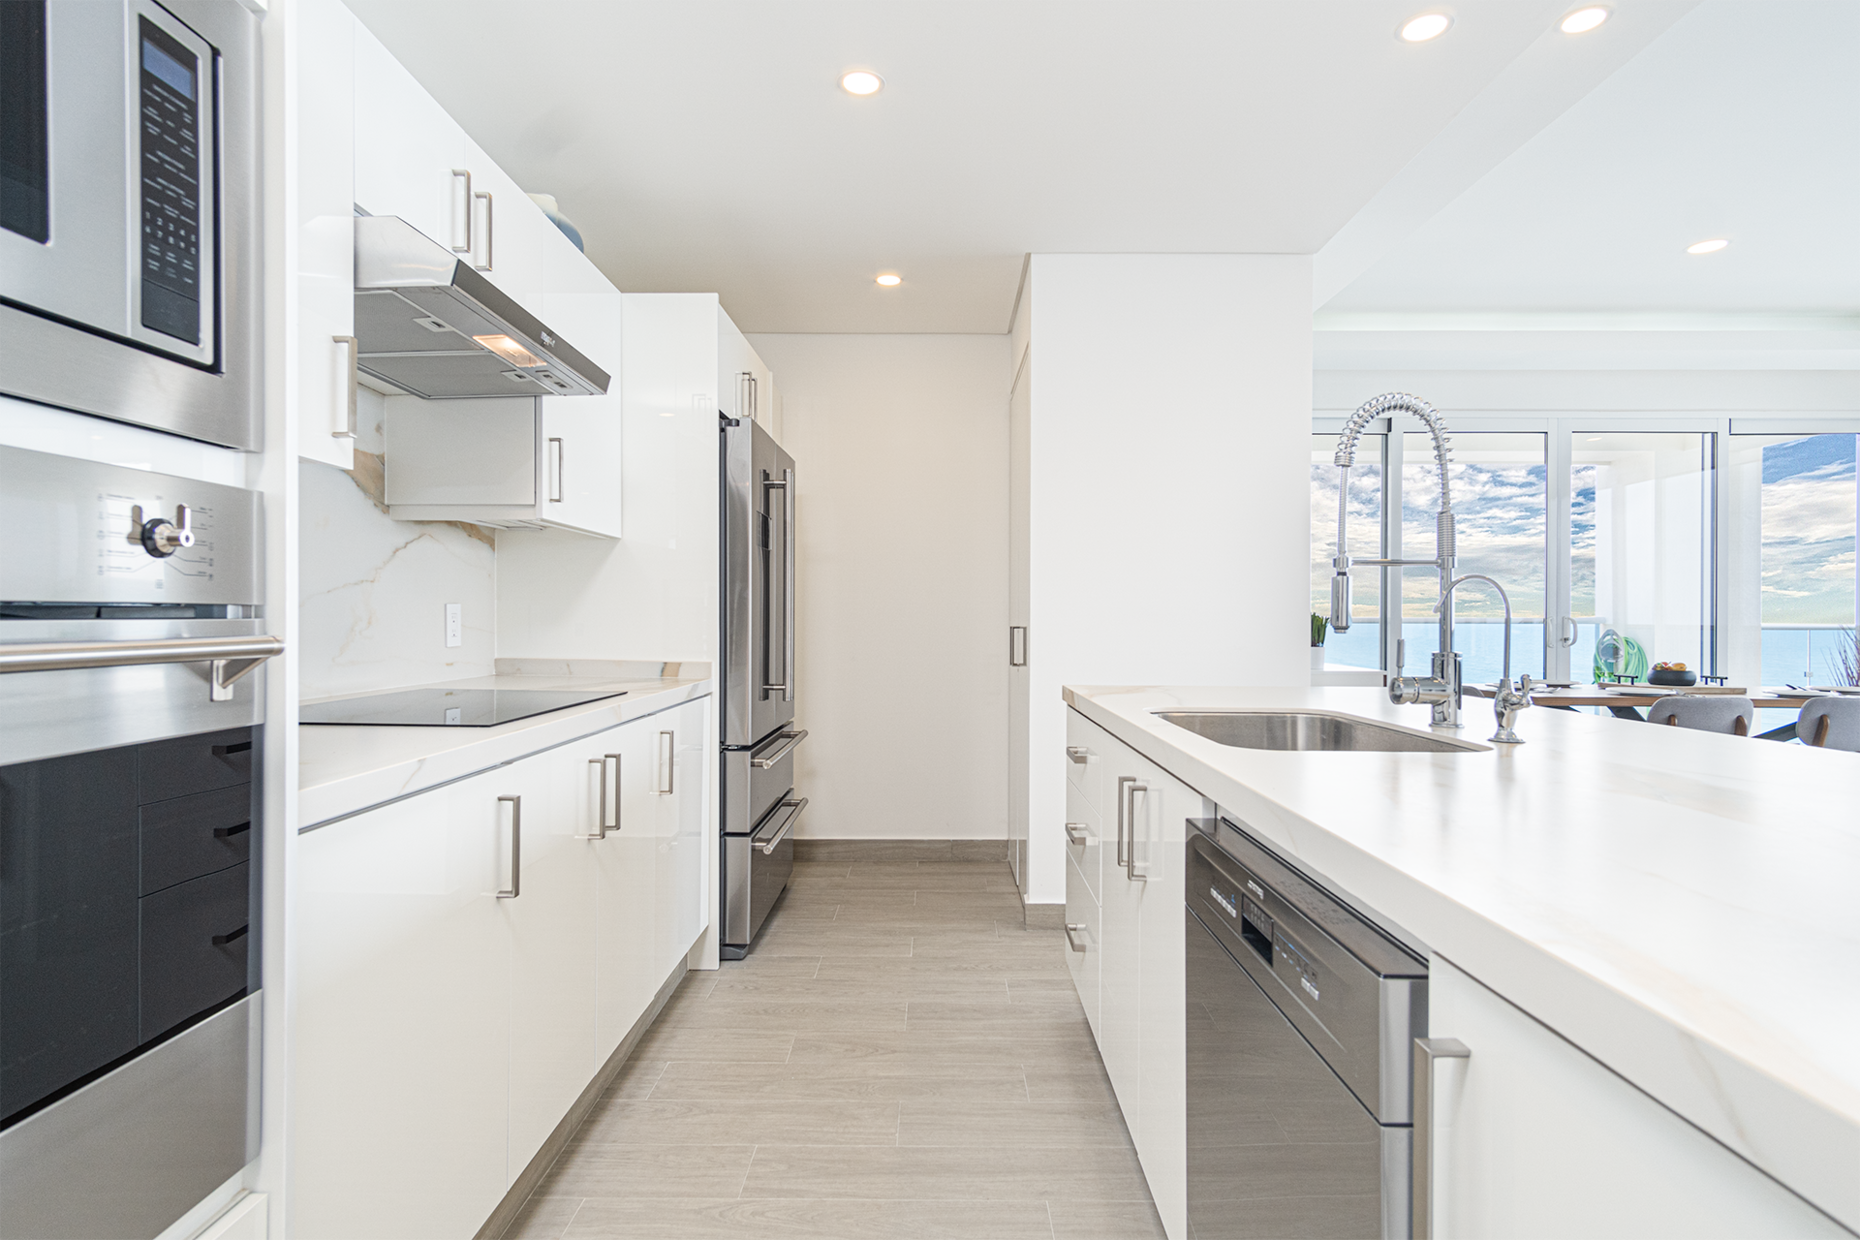 The kitchen is sleek with stainless steel appliances, and clean white cabinets.